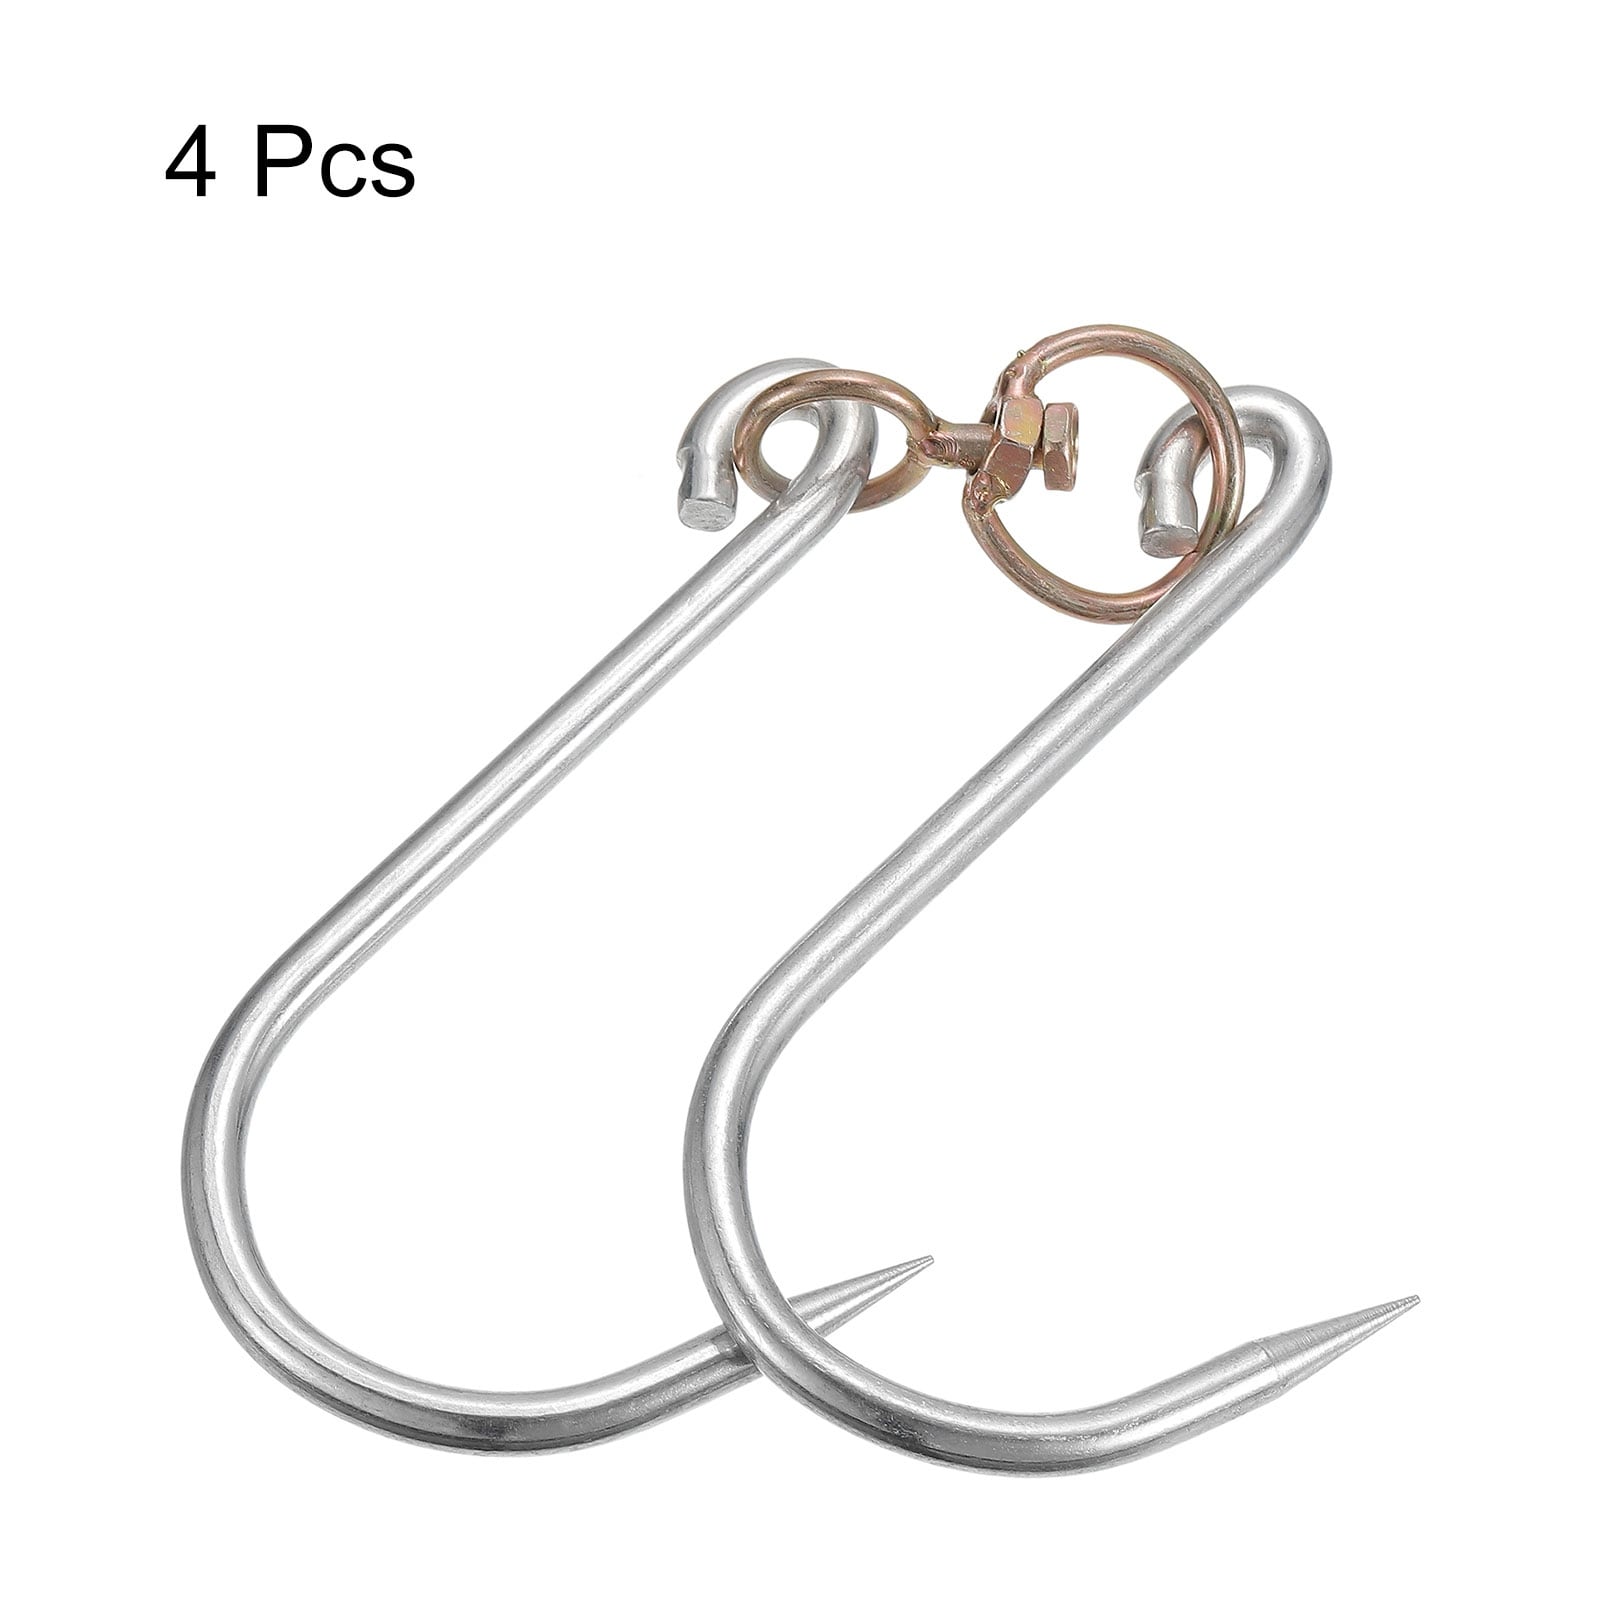 Meat Hooks, Stainless Steel Butcher Hooks for Processing Meats - Silver  Tone - Bed Bath & Beyond - 37683621